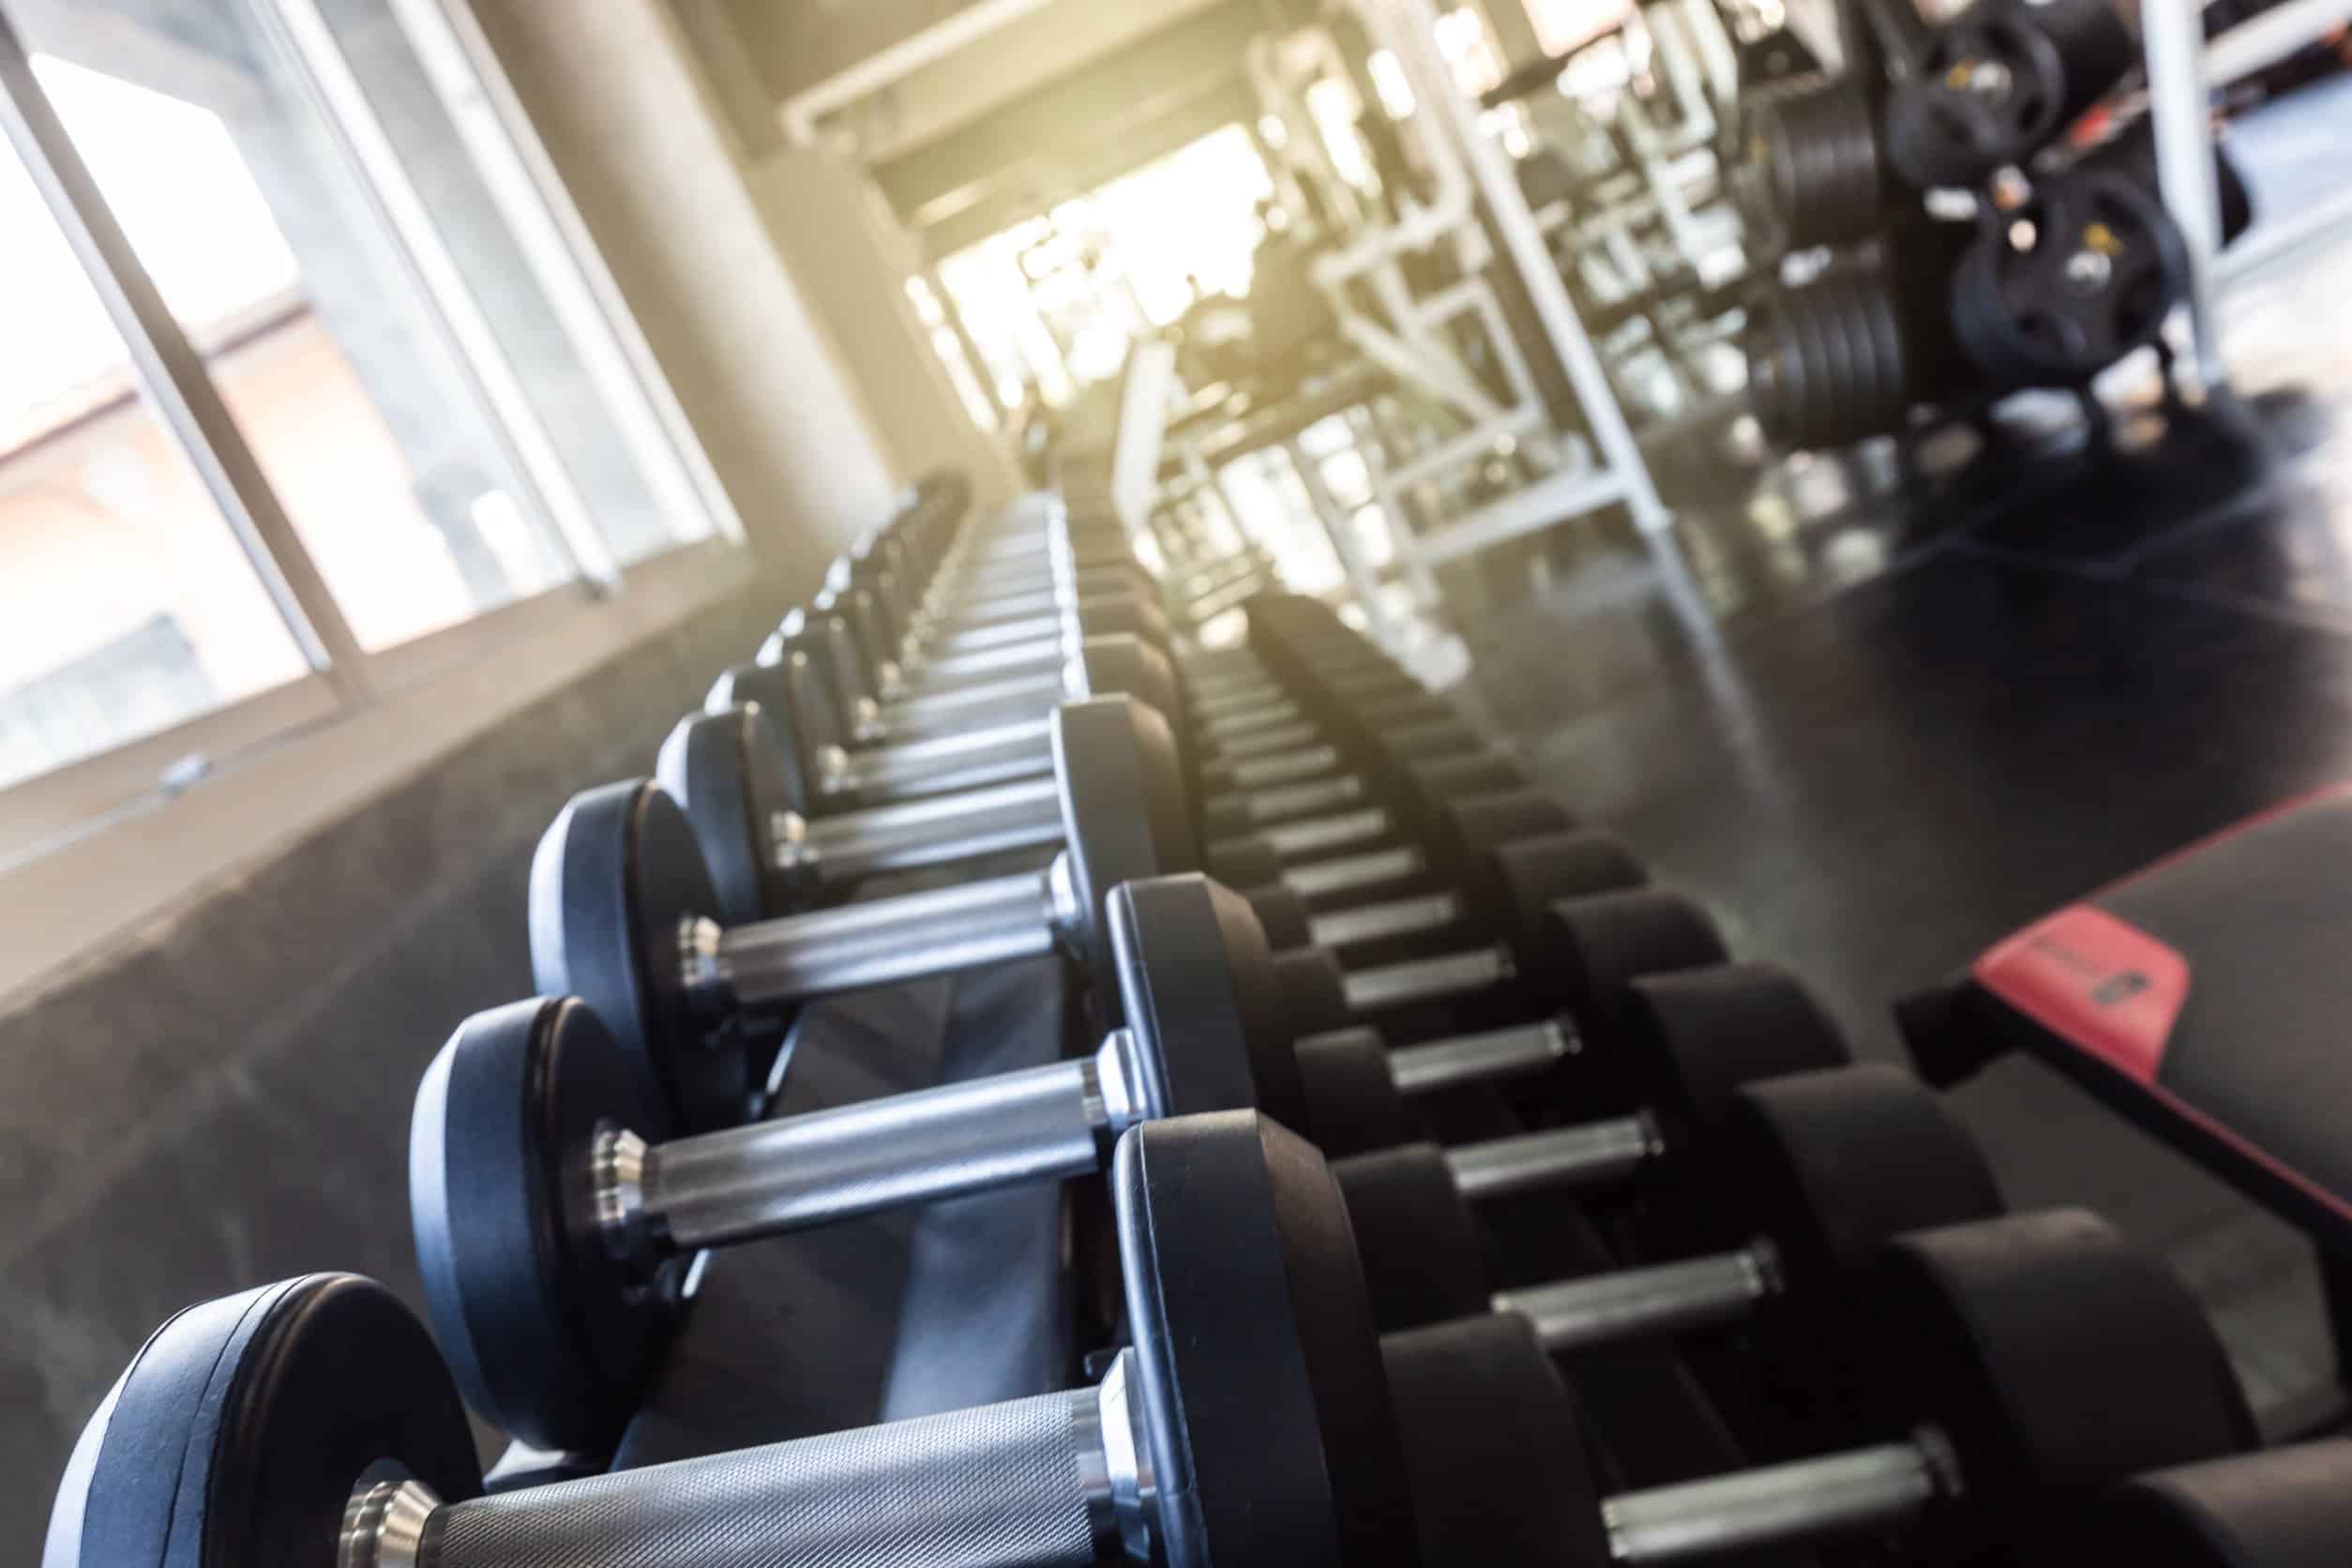 Injured in a FL Gym? Find Out Who is Liable